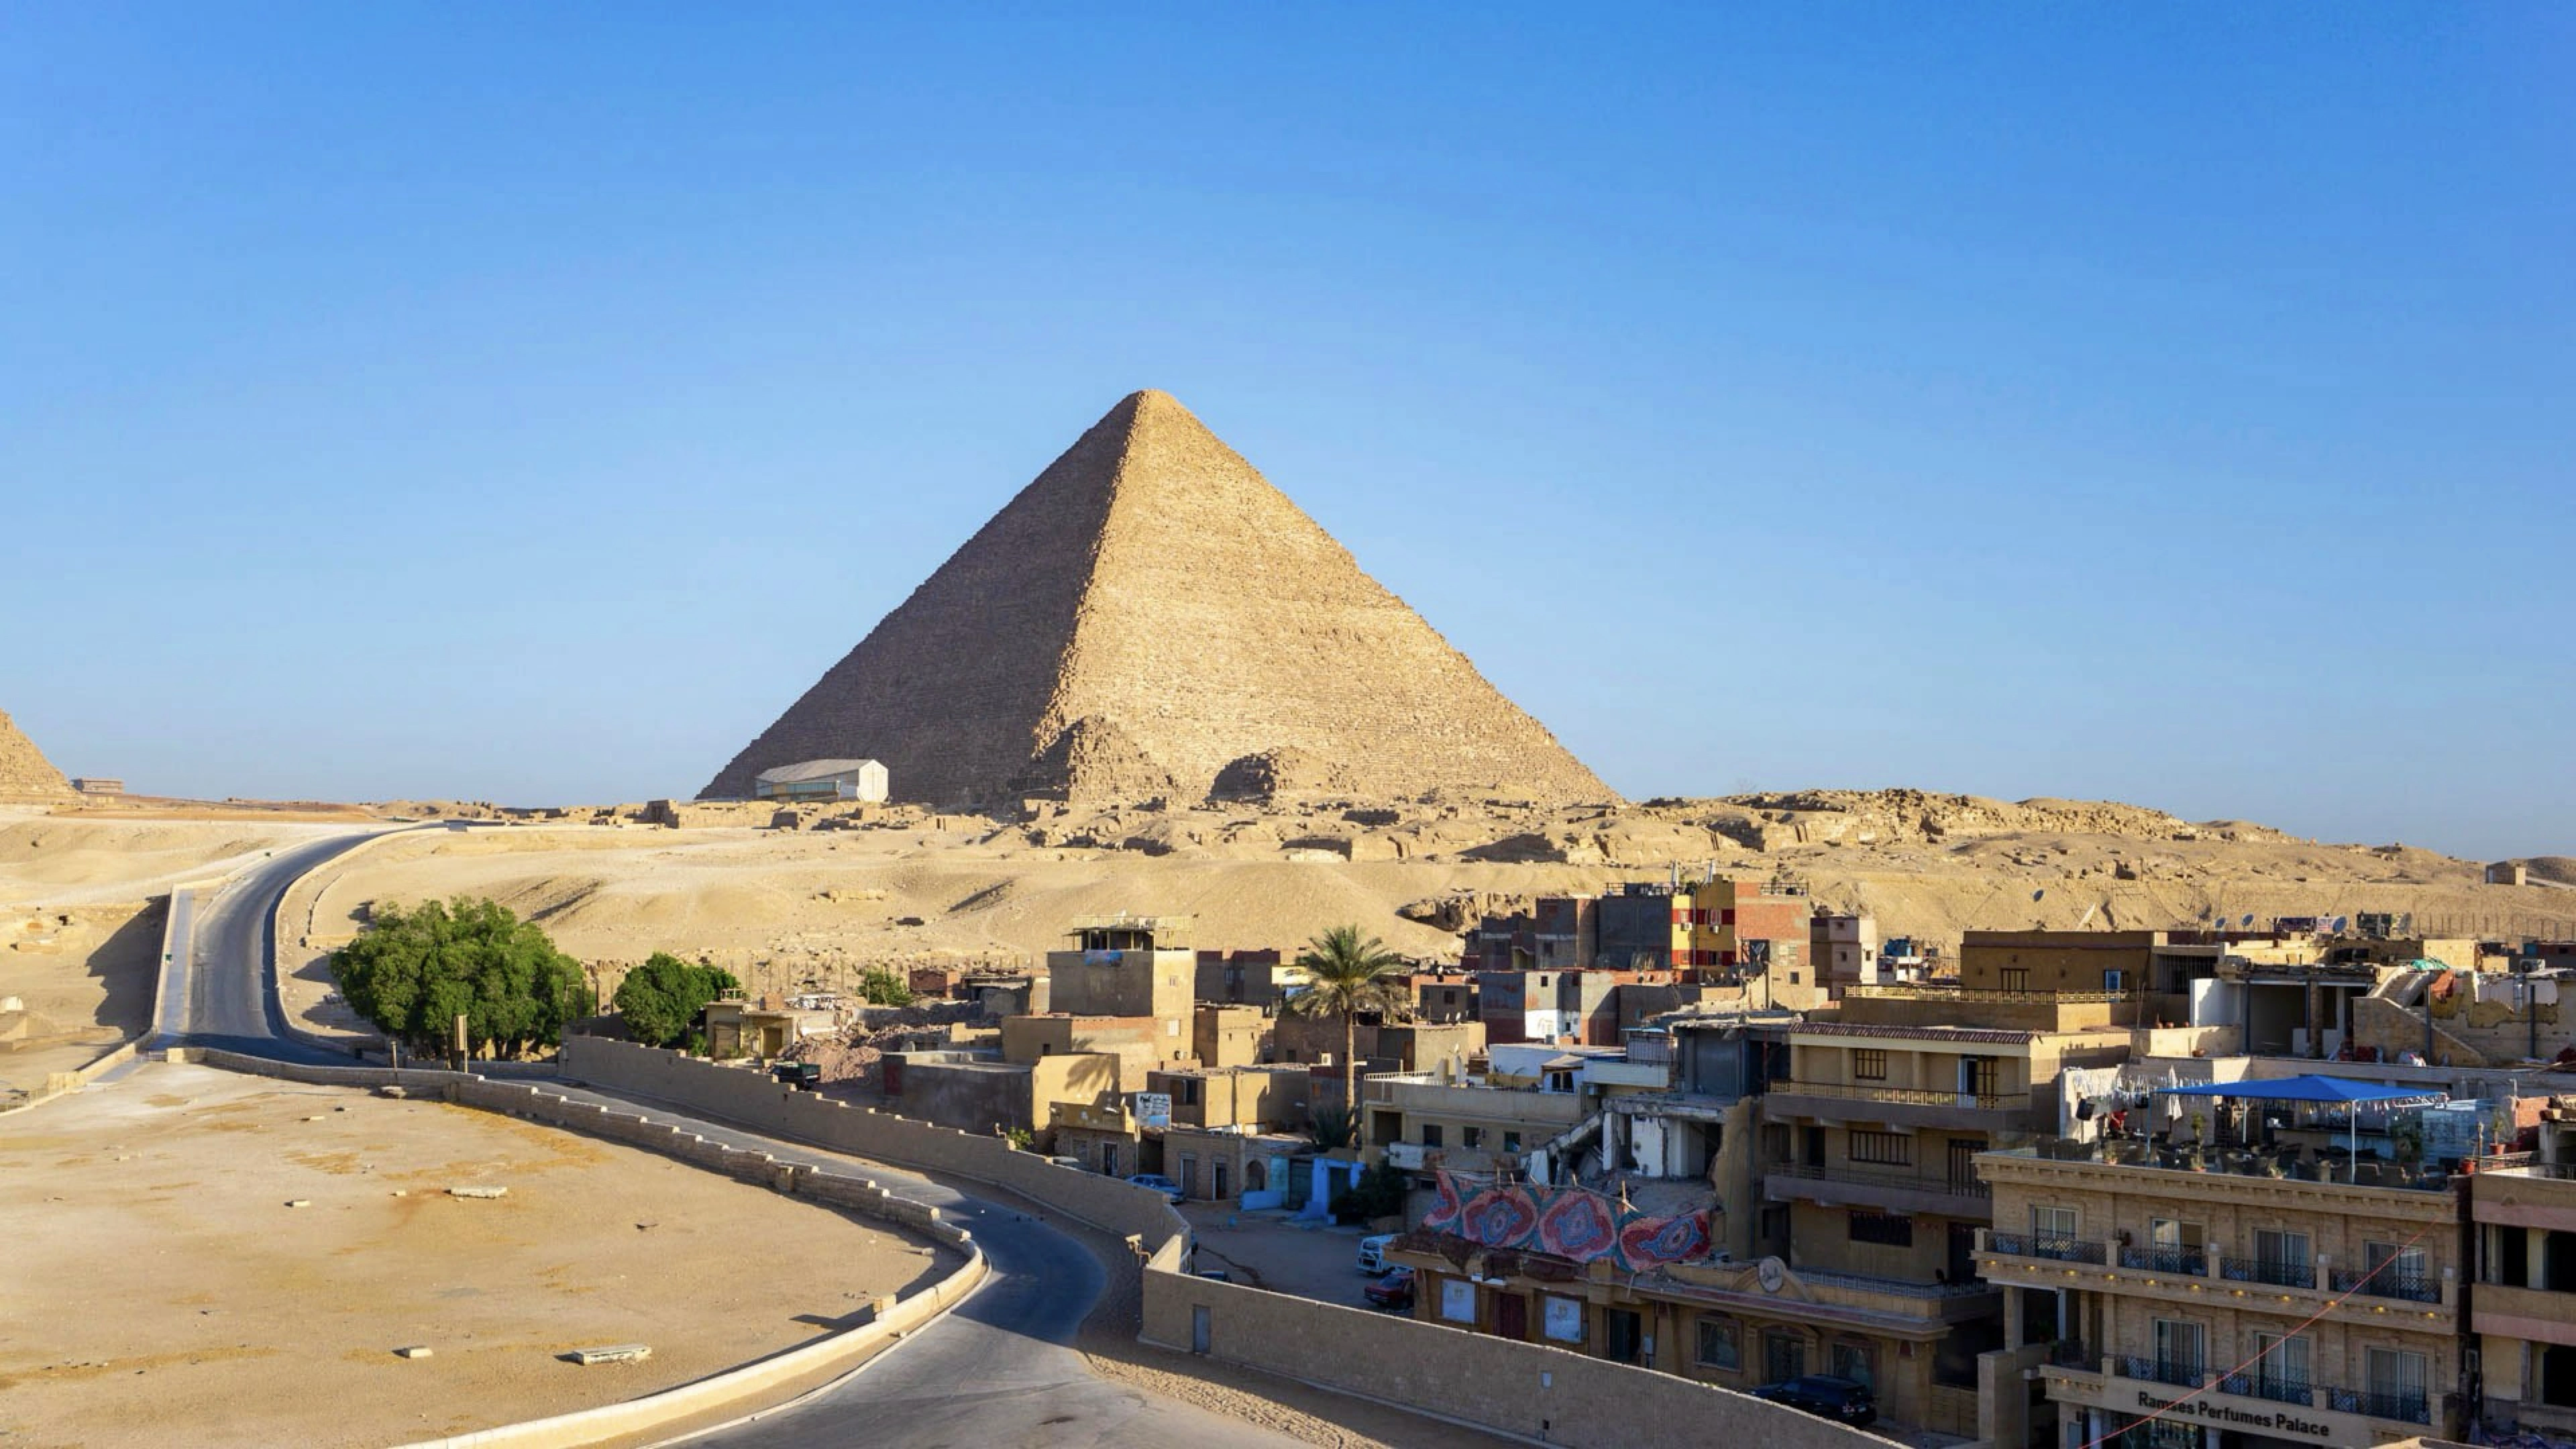 A view of the Great Pyramid of Cheops in Giza, Egypt, set against a clear blue sky. The foreground features a winding road leading towards the pyramid, with several buildings and small structures situated near the base of the pyramid. Photo by FlorentMartin_ via <a href='https://www.flickr.com/photos/yoyo0/49626979137/in/photolist-2iBneVk-2dxXwk8-RZ9gmP-2nN3fE8-2cRyz7X-2dr86UX-2gv1A1y-23RchDZ-SKNMUU-2iFBRf1-abMDxk-2dLgkSW-2mLjugE-2o9Nqa1-2ankvjA-2hGw2GG-yBNw1C-2kdBX4N-2oGuiNN-2pnZnEK-2d9bjTt-2iFBsHT-2bsYksX-7ULiJd-b1dQHk-b1dPjk-2exU8xE-2omRrZf-2ojvSzG-2dBPuBr-2phAYVU-2ikxp7X-2iRH3Nm-ZUxukP-2e2cUJx-8HpmPX-2bozDN5-FT3XkW-2kUKLTH-ZRRP17-X26pGM-2p4LPcL-2kqqUrm-2mLwX6p-2e2cUkM-jurjGS-2kzg4ws-AyfeJQ-nwUcy3-4ziFZn'>Flickr</a>